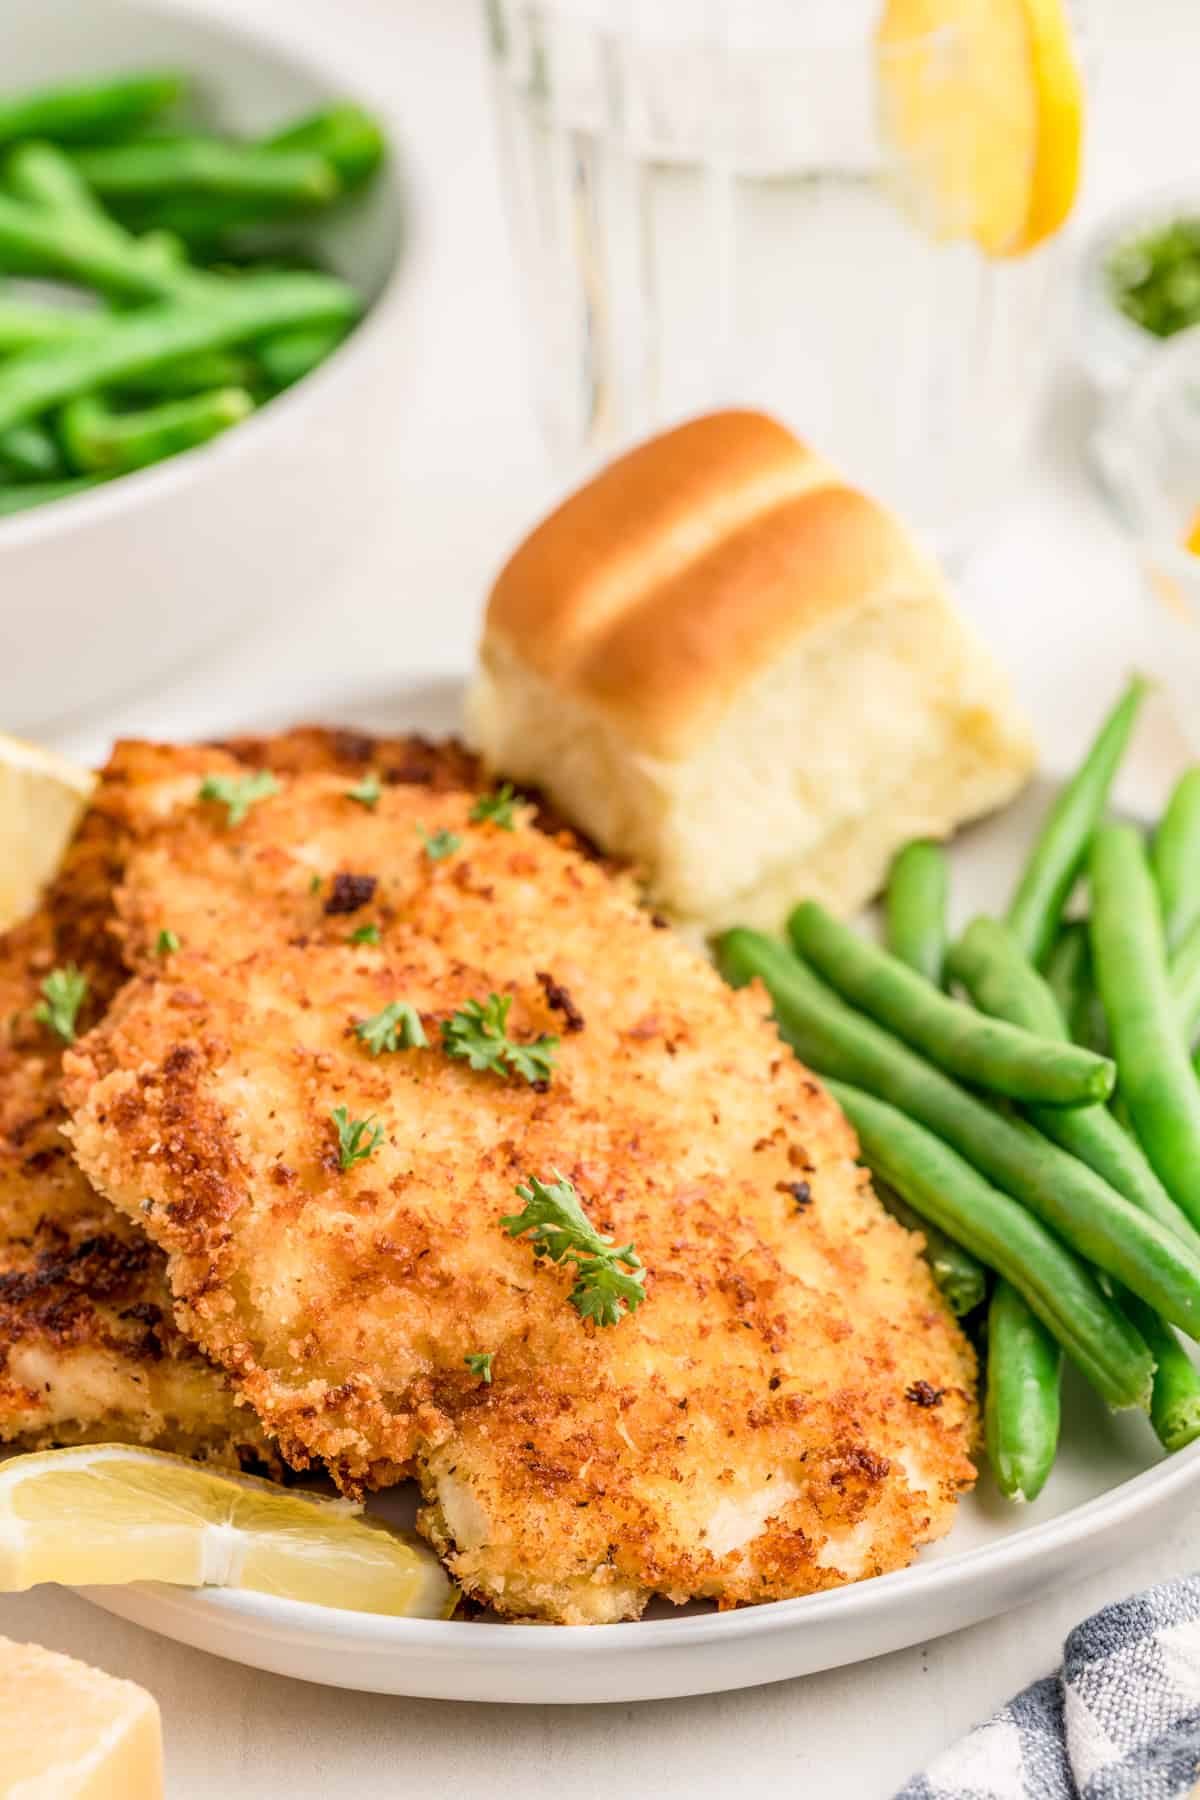 Parmesan Crusted Chicken on white plate with green beans, bread and lemon slice.